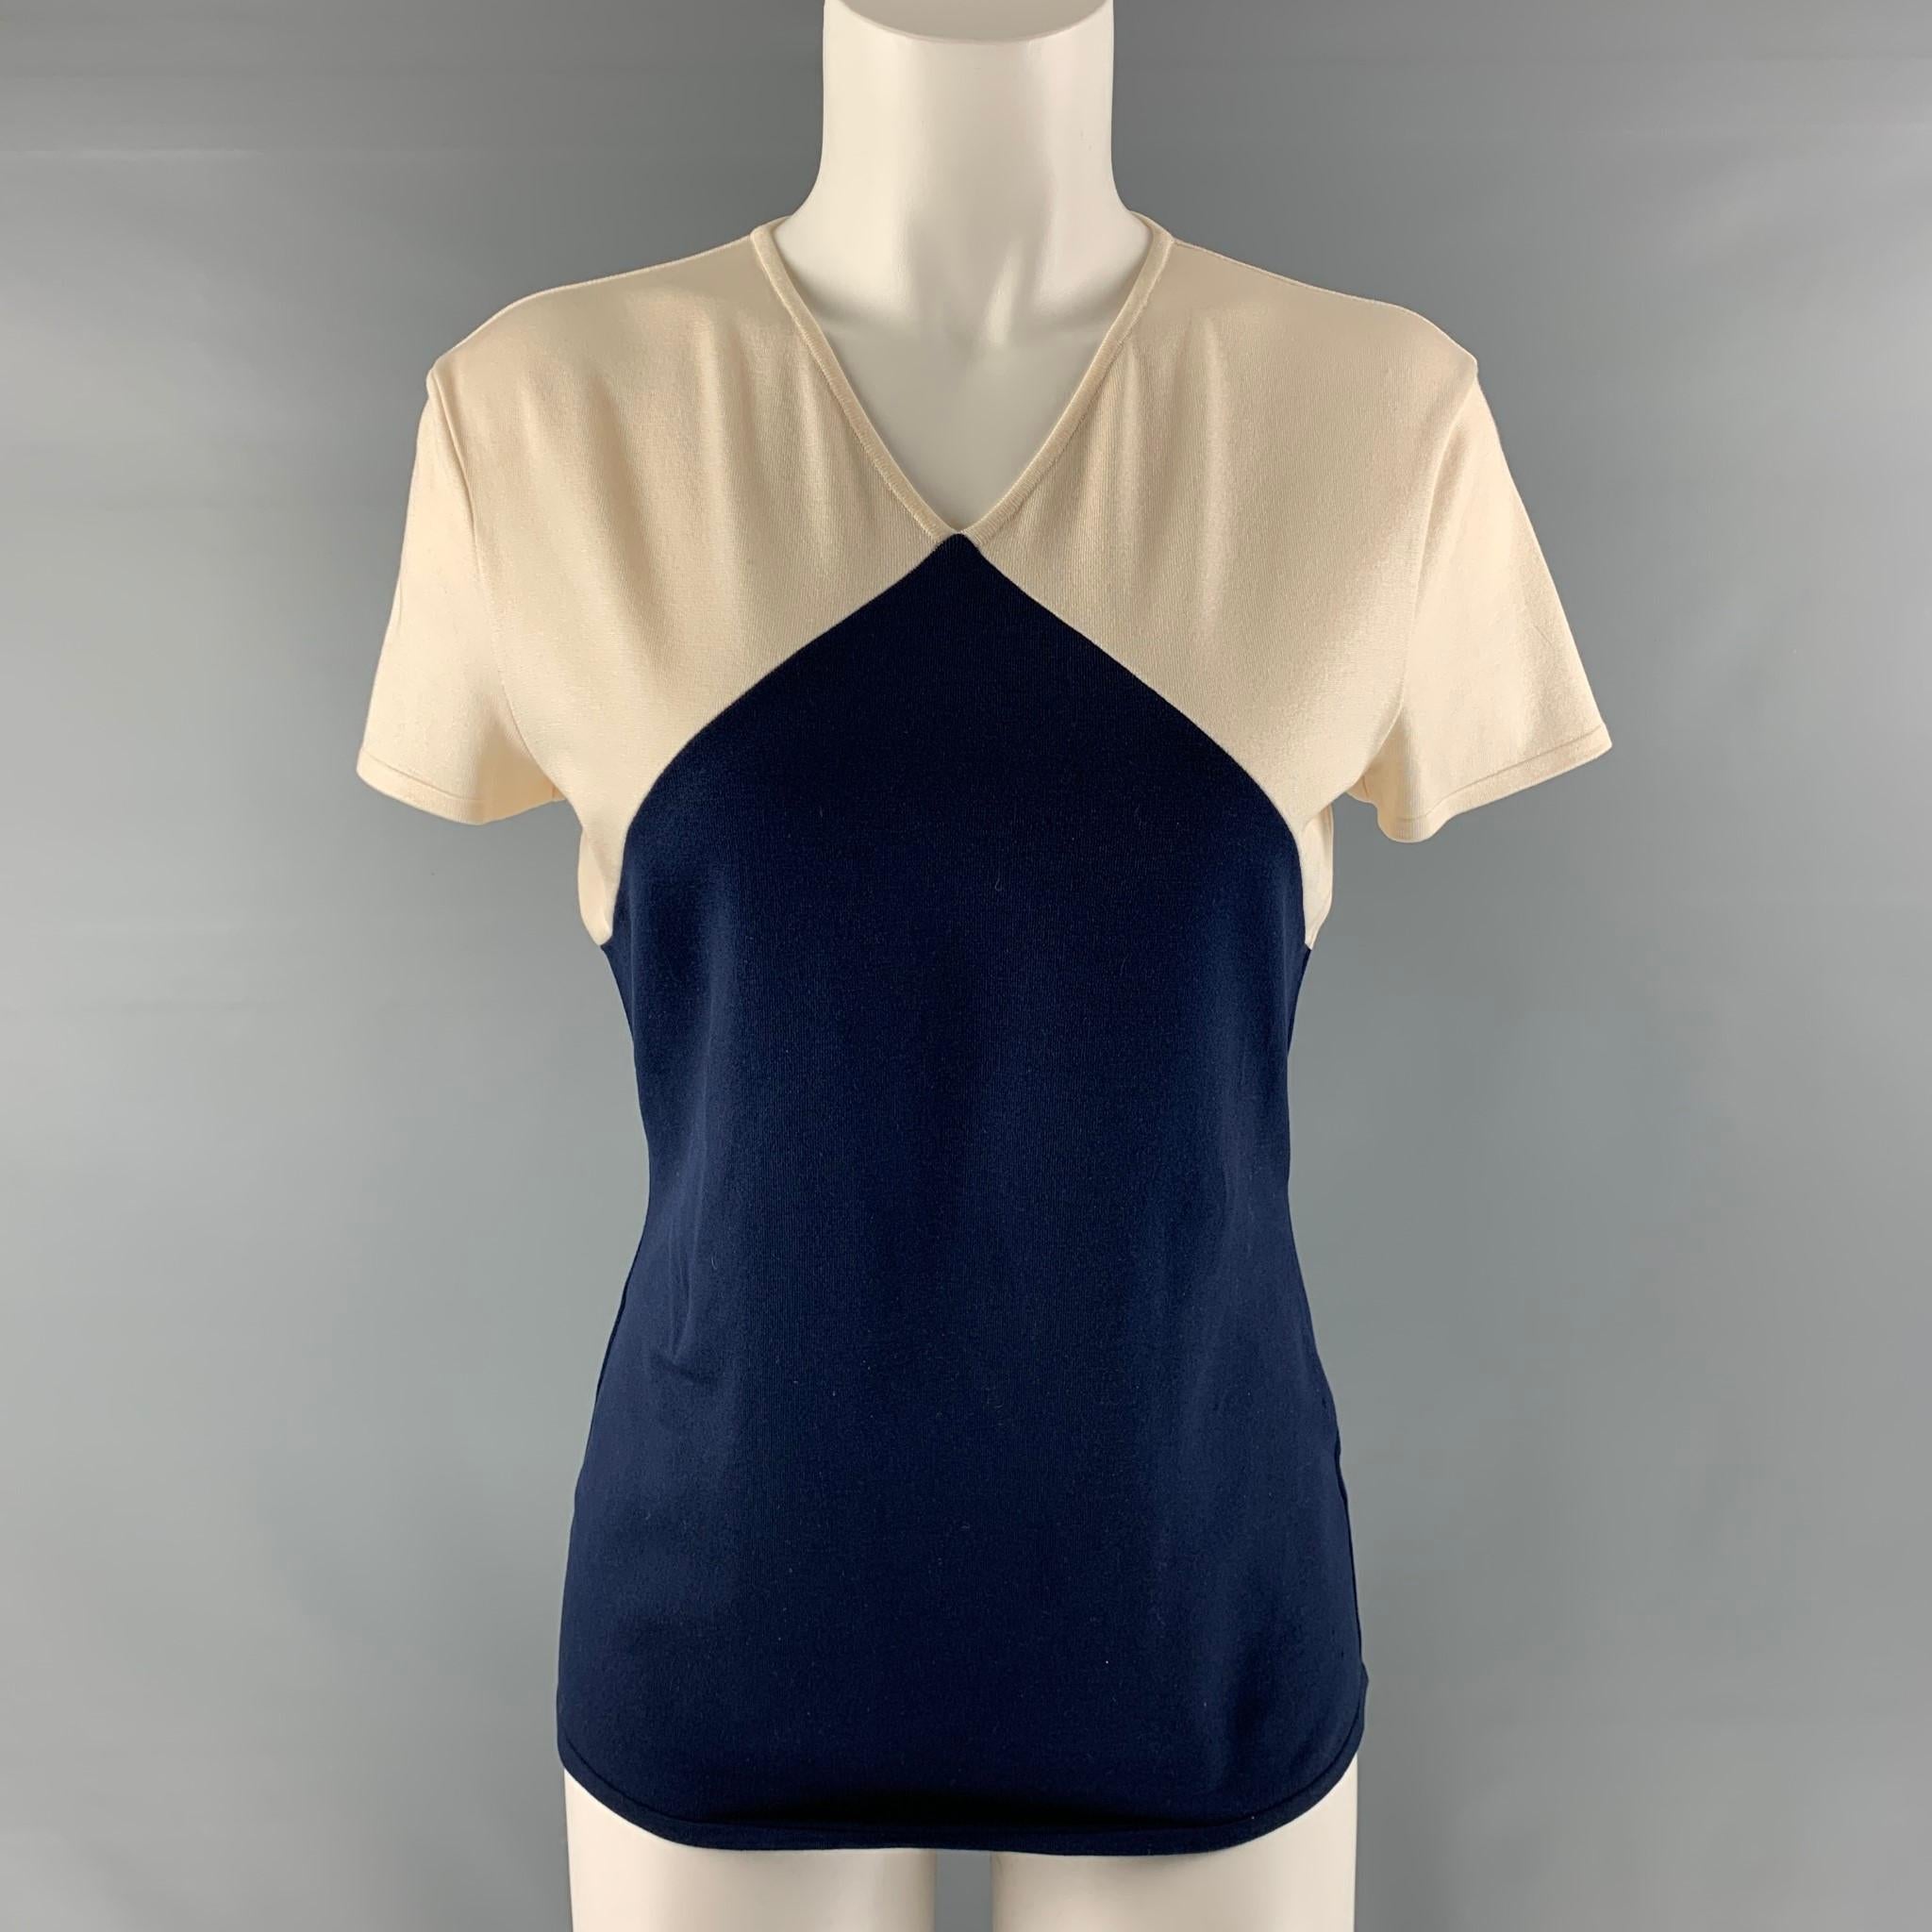 RALPH LAUREN 'COLLECTION by' short sleeve pullover comes in a cream and navy silk blend jersey featuring a v-neck and color block style. Made in Italy.

Excellent Pre-Owned Condition.
Marked: M

Measurements:

Shoulder: 17 in.
Bust: 39 in.
Sleeve: 7